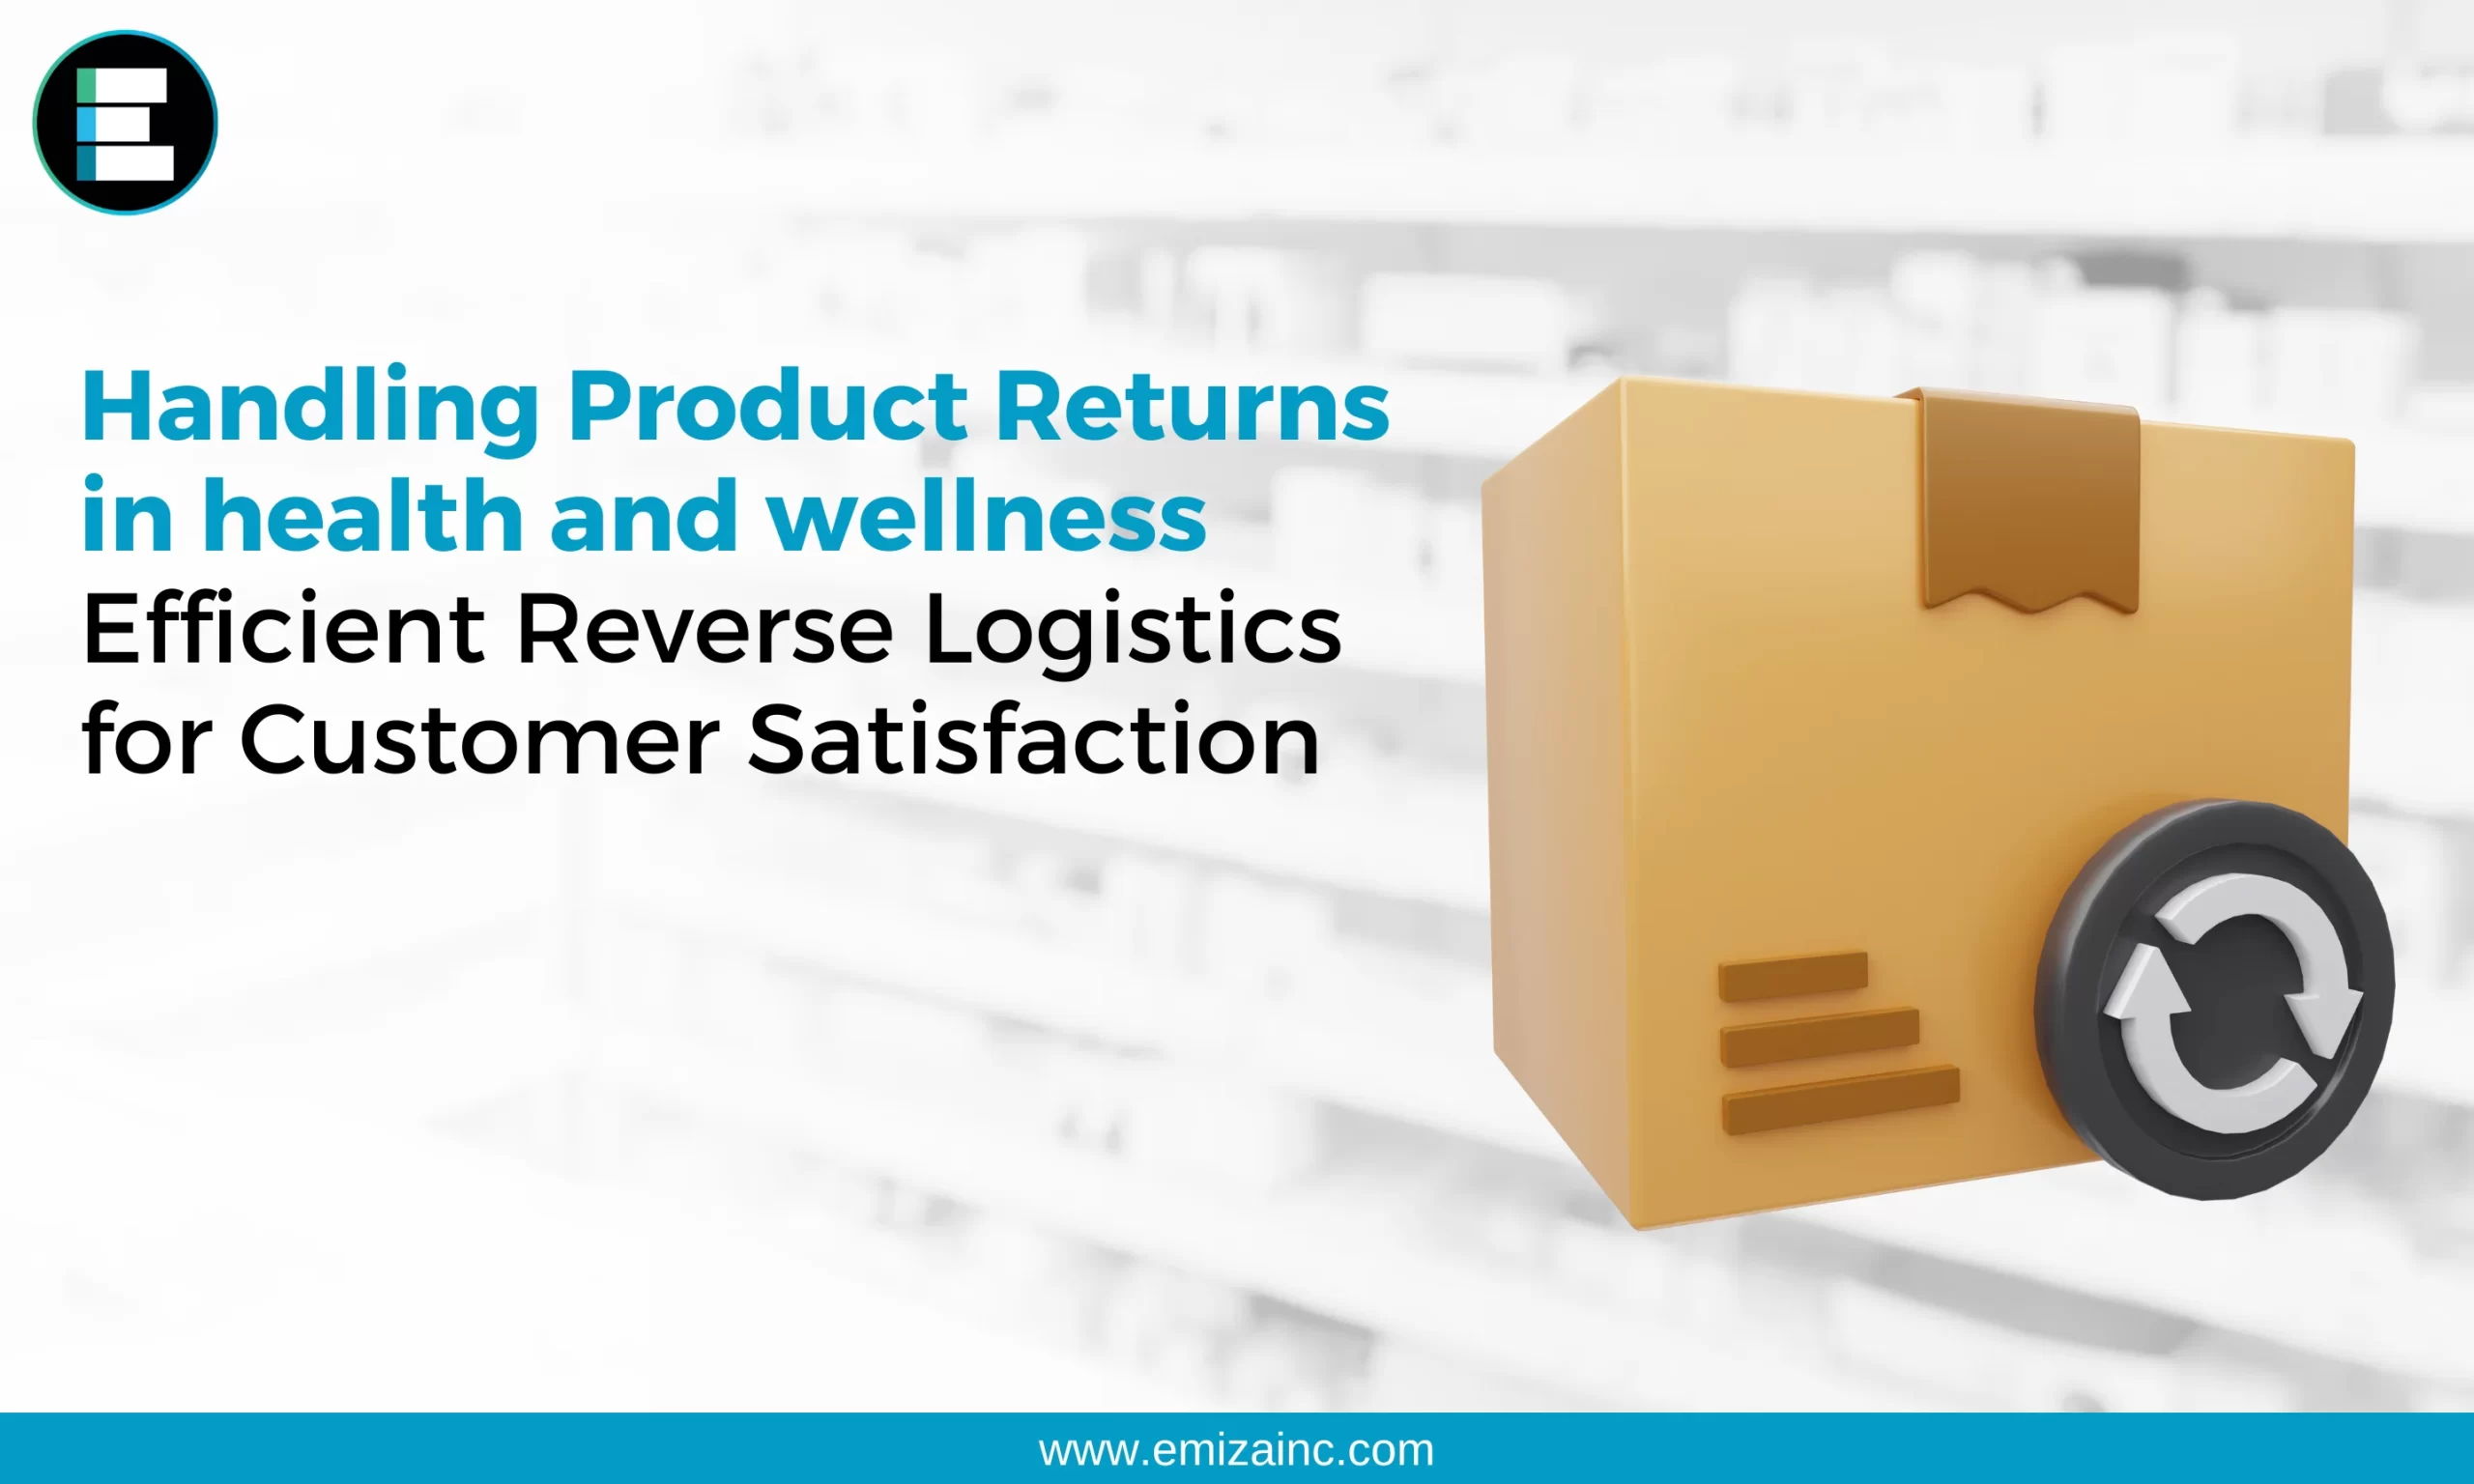 Handling Product Returns in Health and Wellness: Efficient Reverse Logistics for Customer Satisfaction